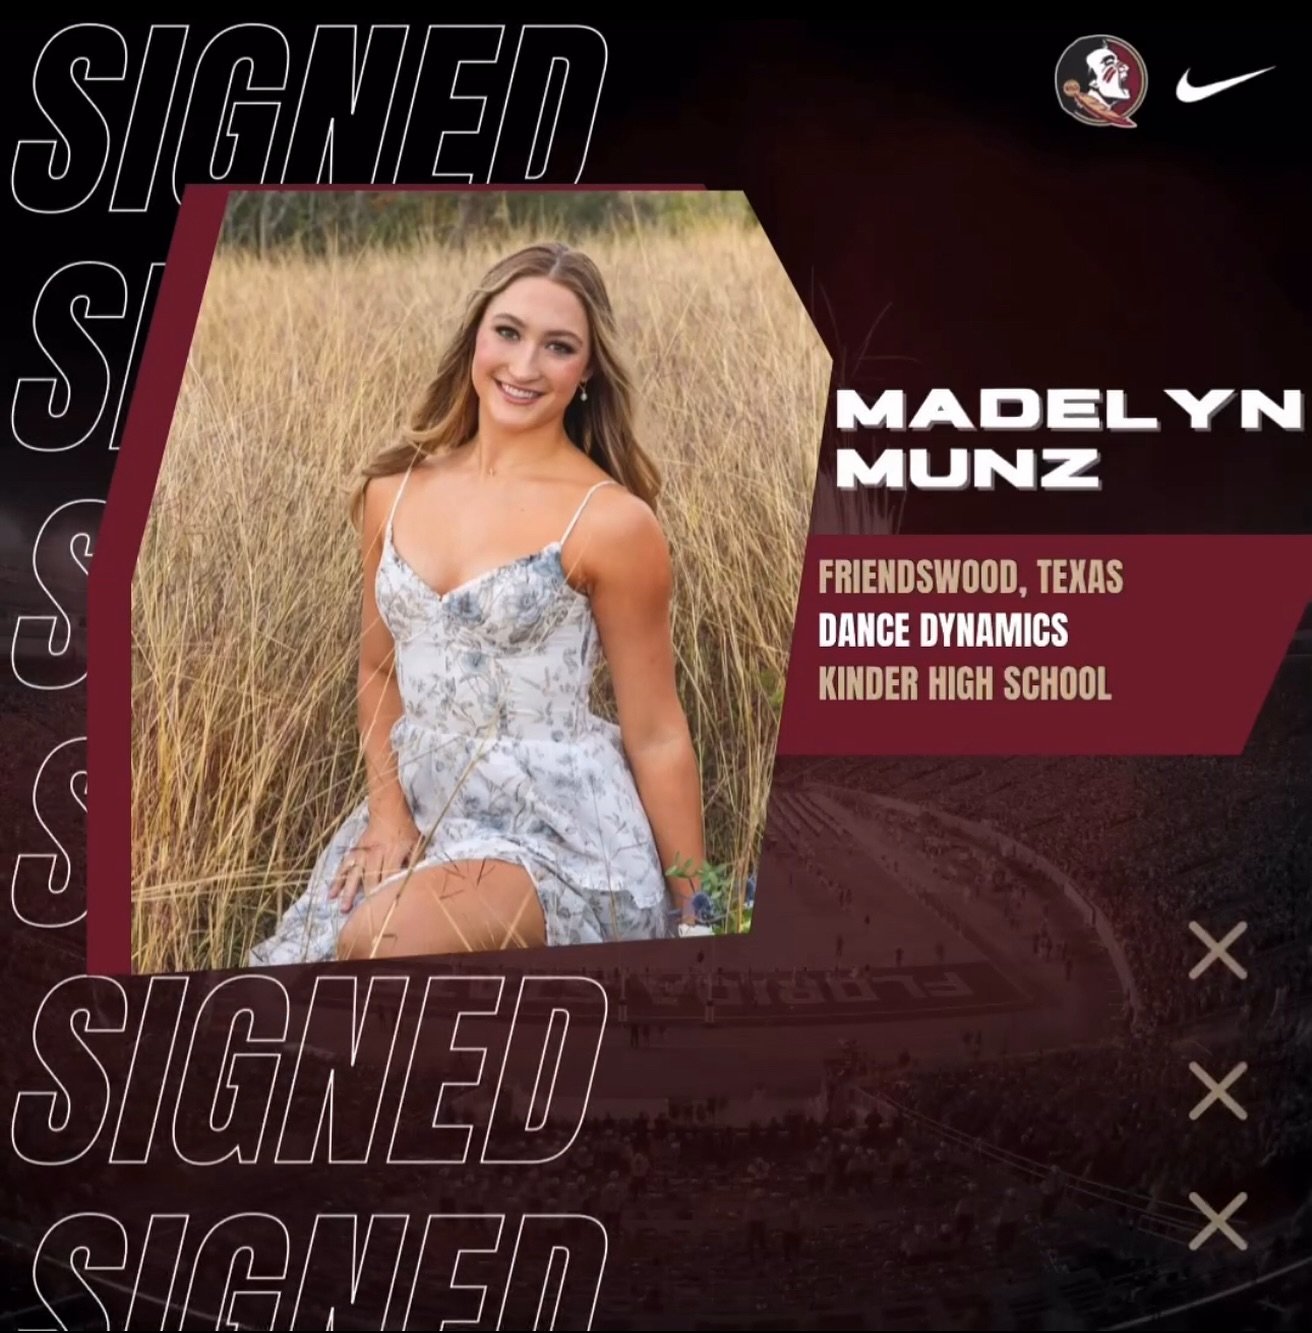 ANOTHER HUGE CONGRATULATIONS TO WORLDS TEAM MEMBER AND GRADUATING SENIOR @madelyn_munz ON BEING ONE OF THE NEWEST MEMBERS OF THE @fsugoldengirls! We have loved having you as a part of DD this season, and can&rsquo;t wait to see you continue to wow us